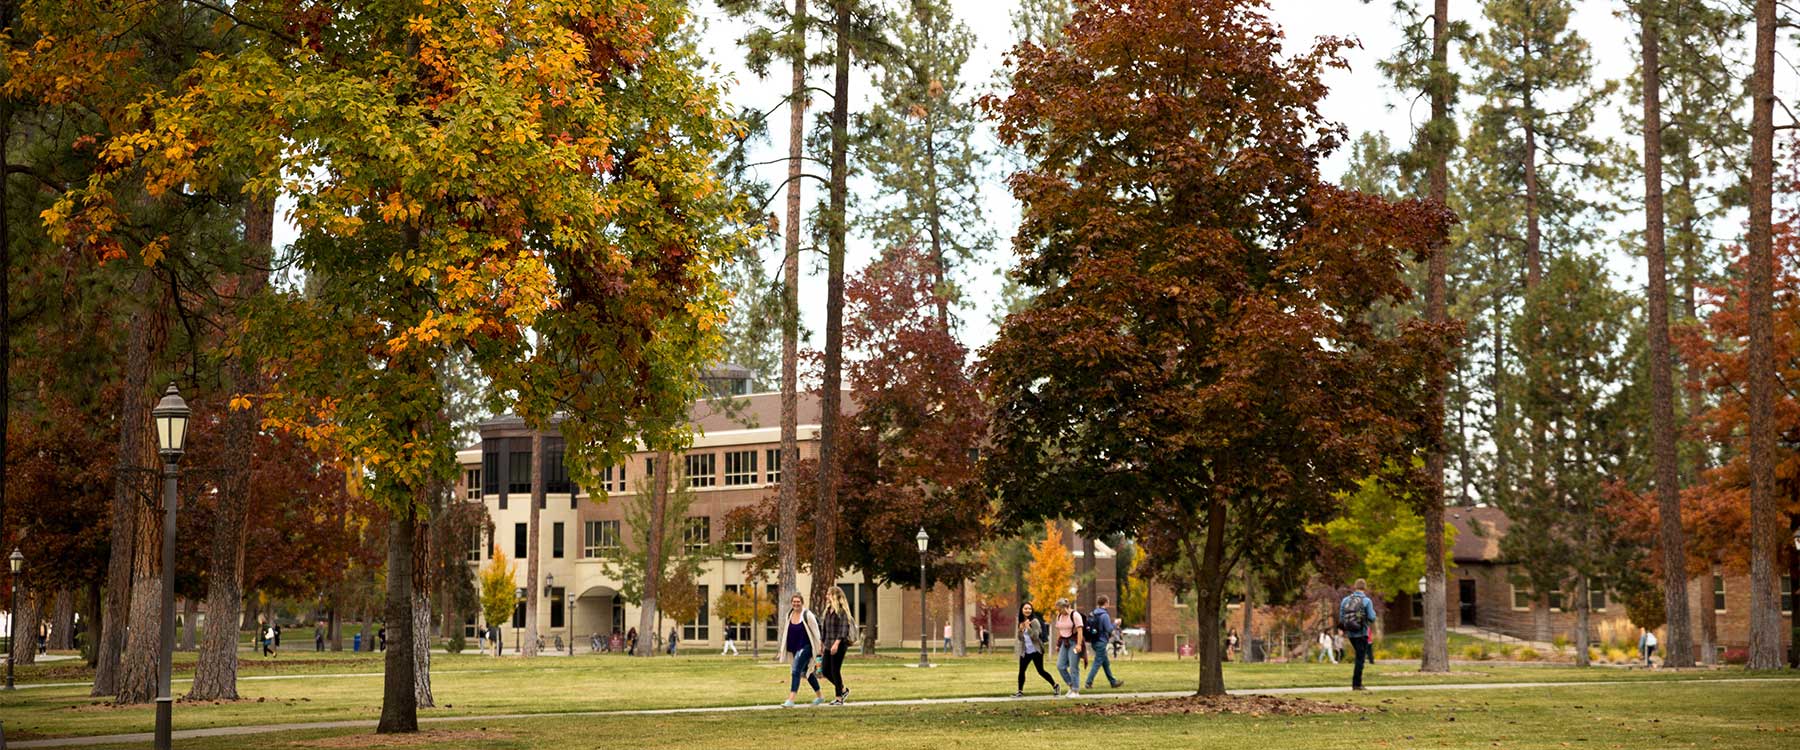 Many students walk between academic buildings on campus pathways beneath trees with fall foliage.